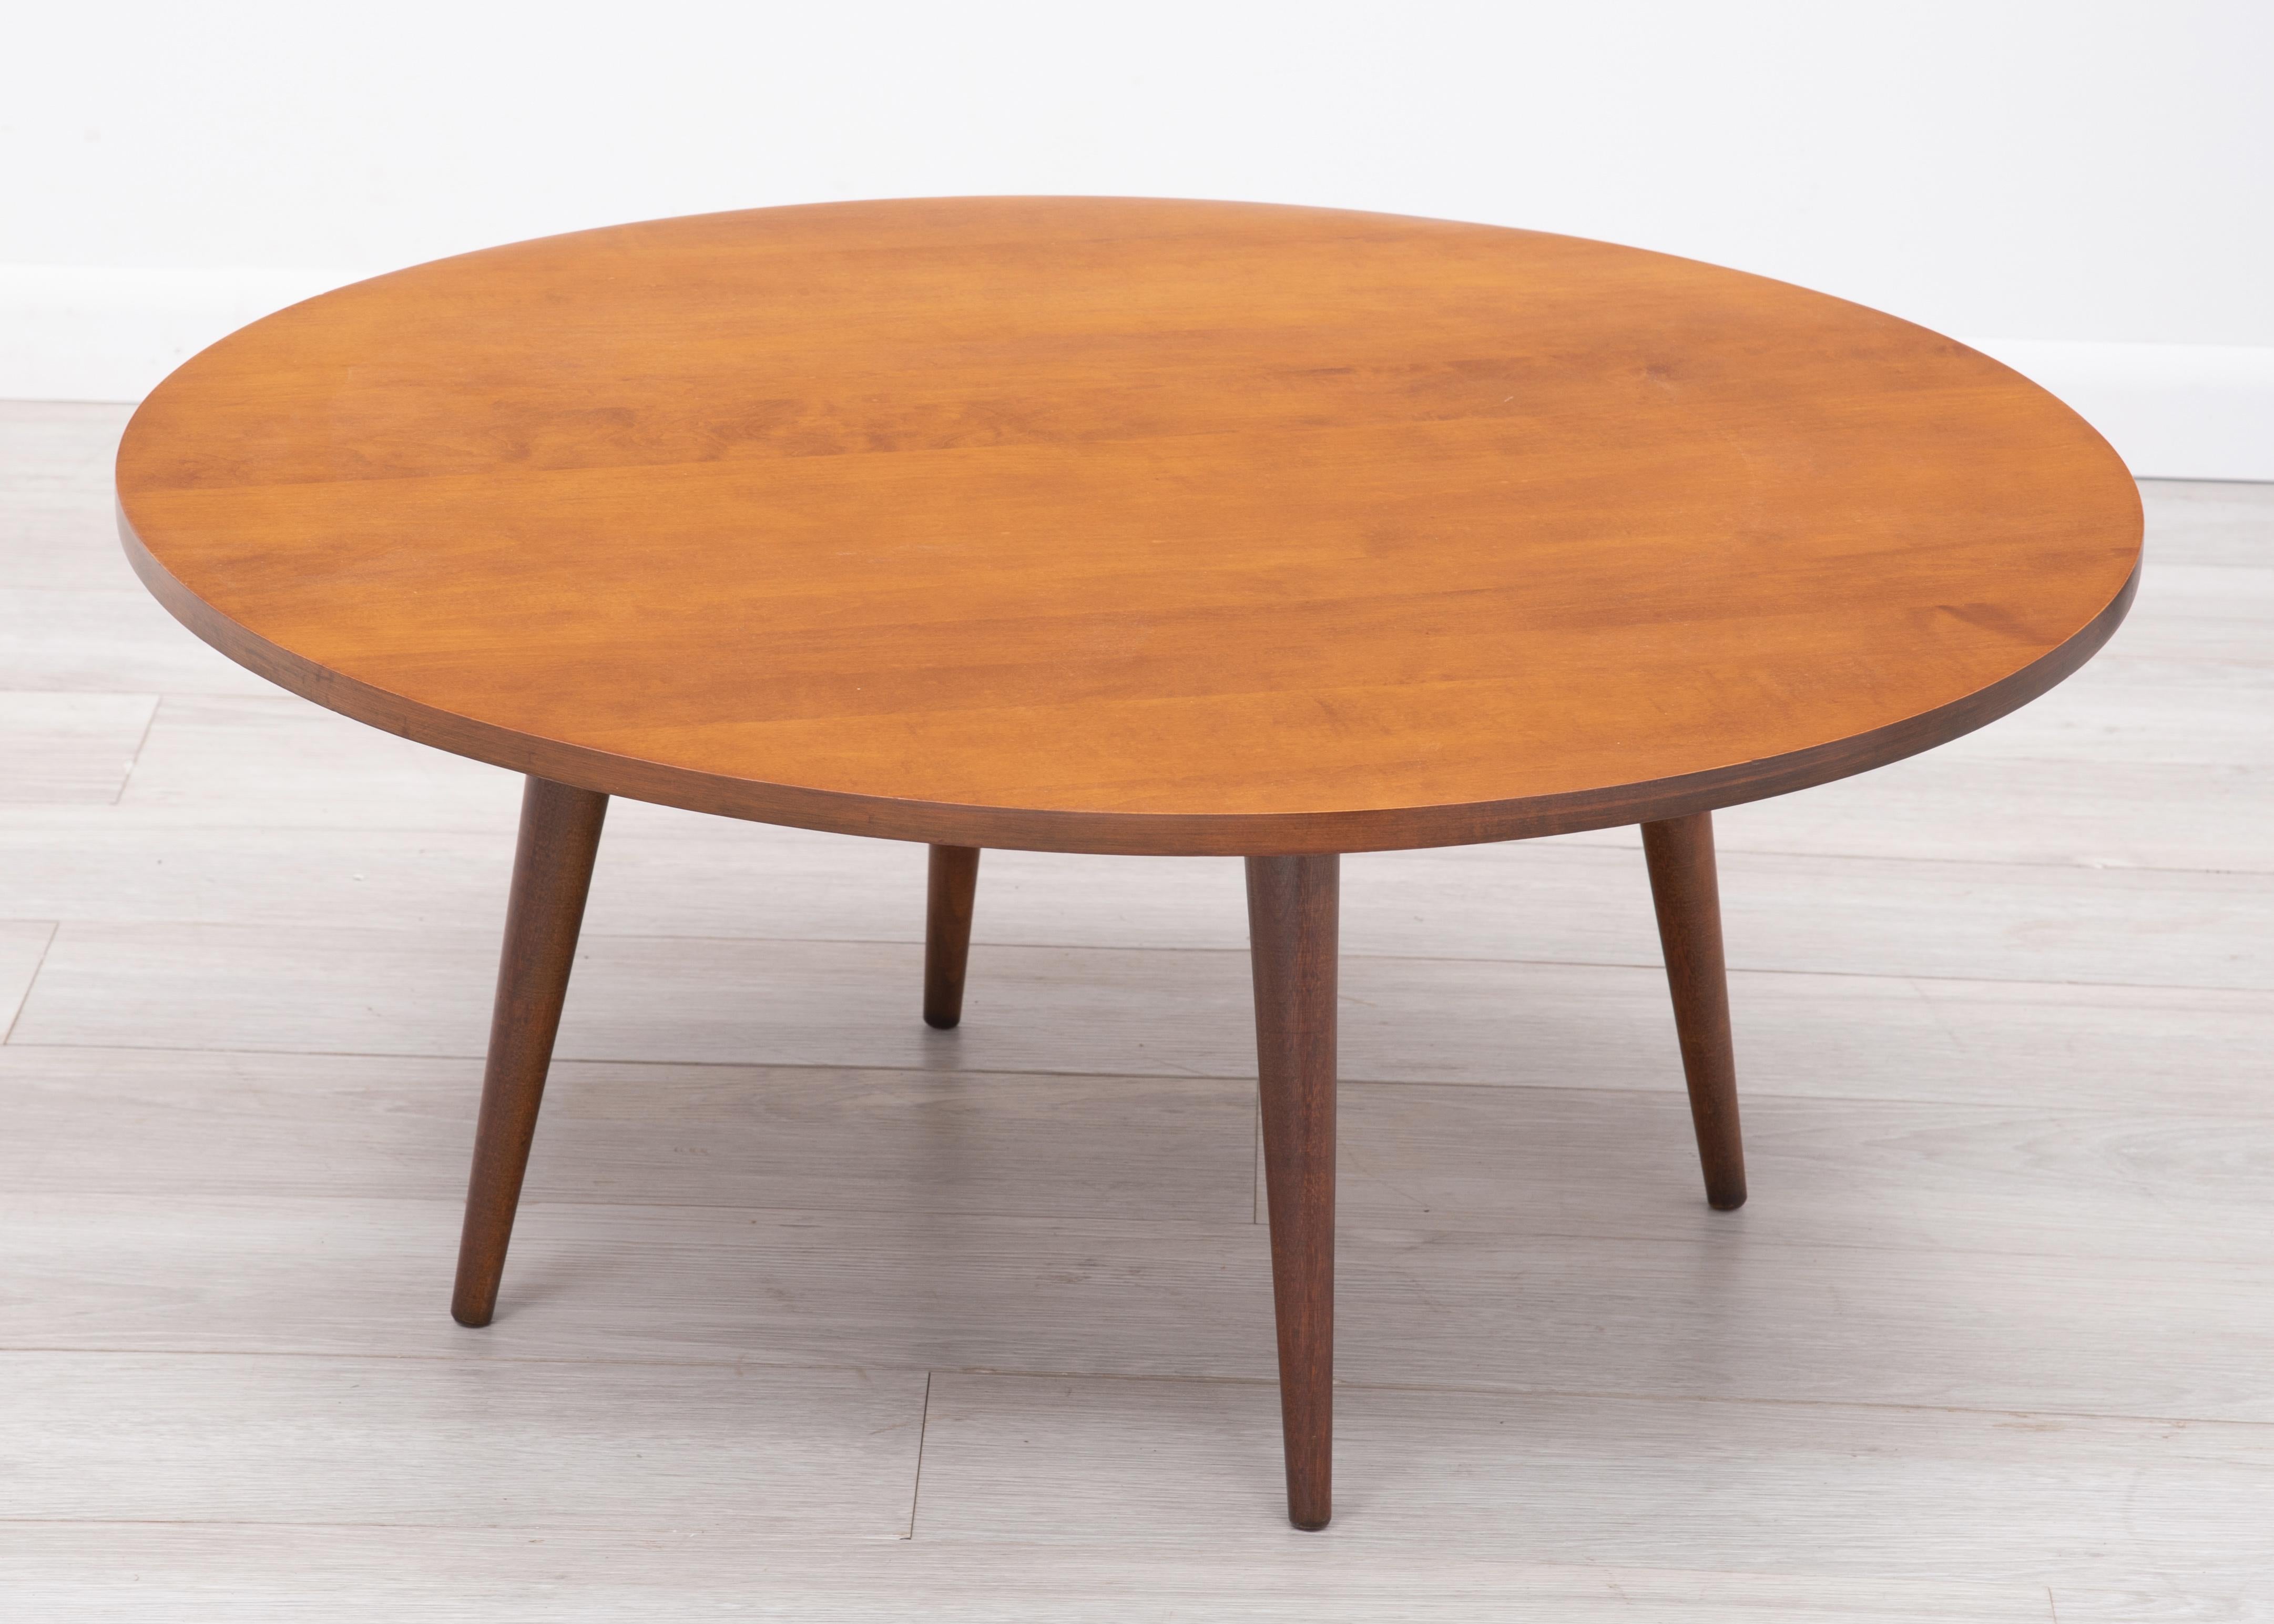 A round Paul McCobb Planner Group coffee table for Winchendon Furniture. Circa 1950’s. Unmarked.